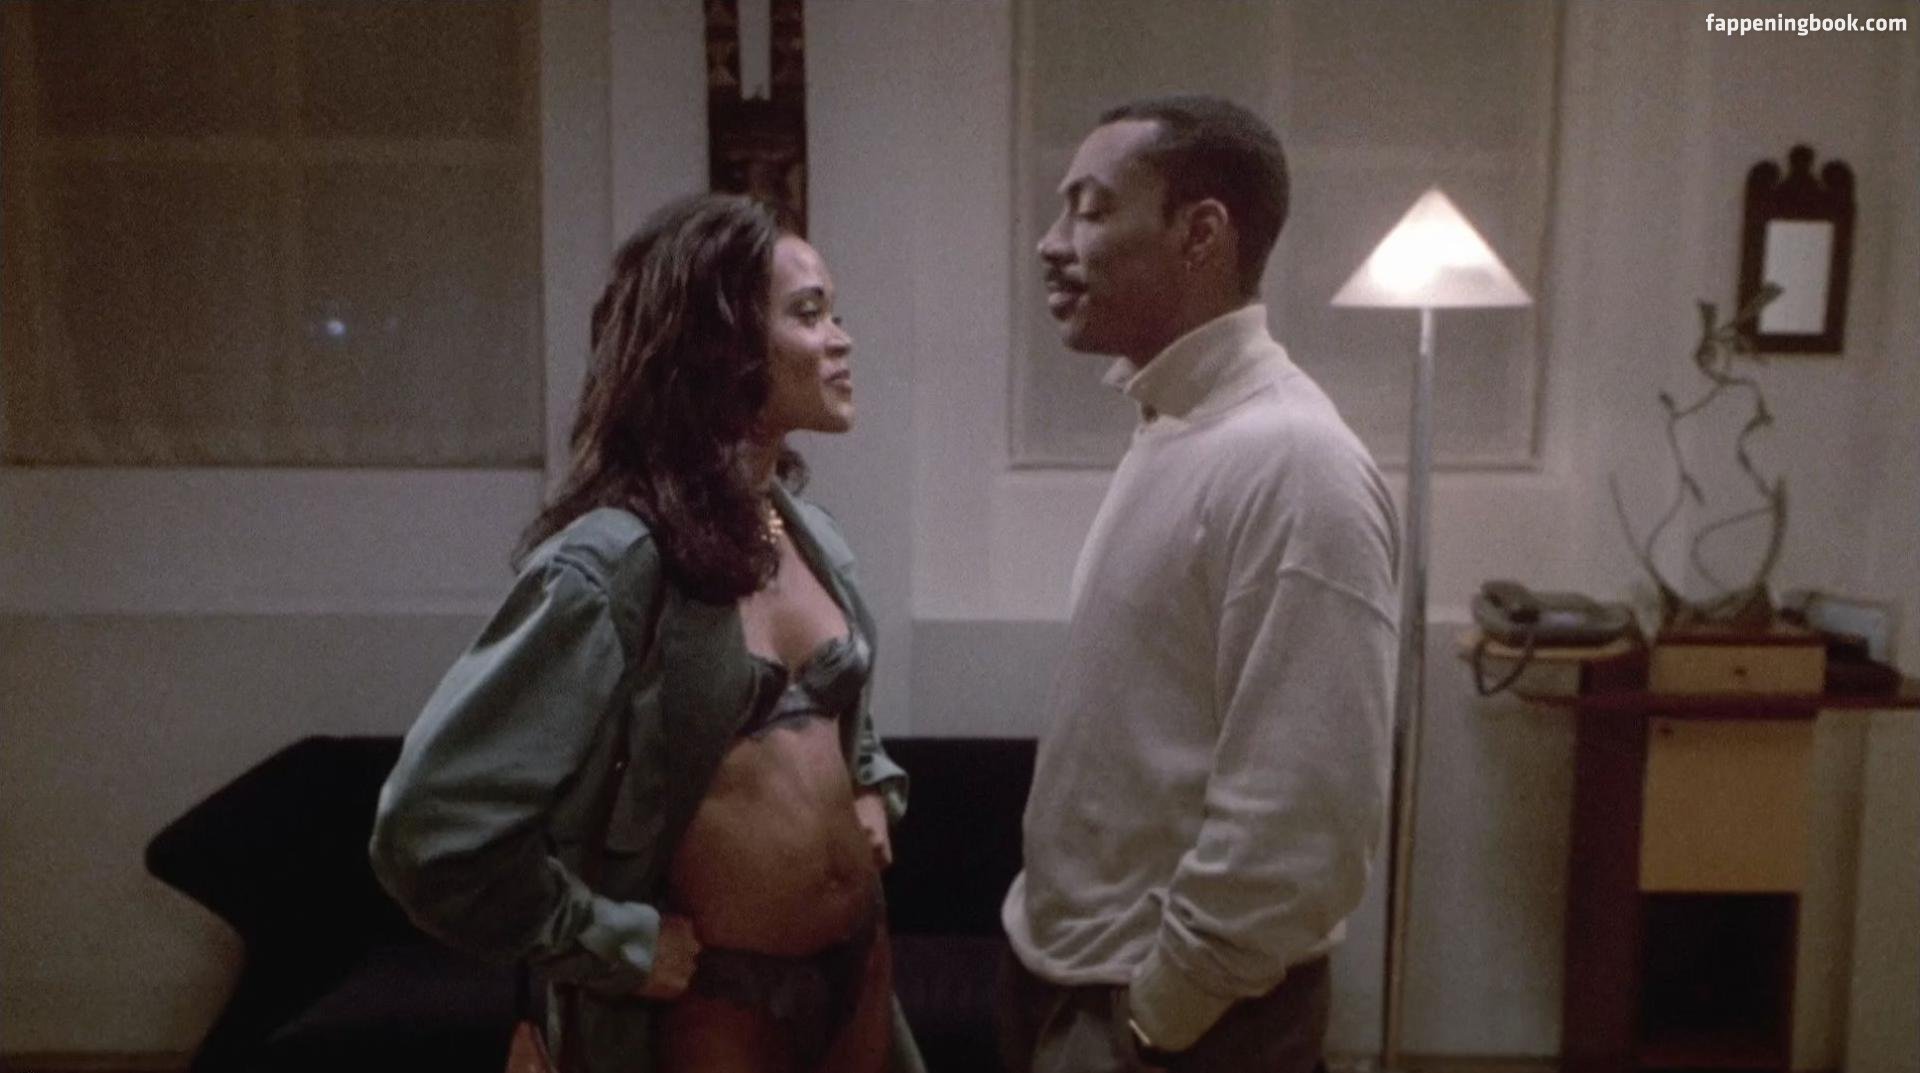 Robin Givens Nude, The Fappening - Photo #463580 - FappeningBook.